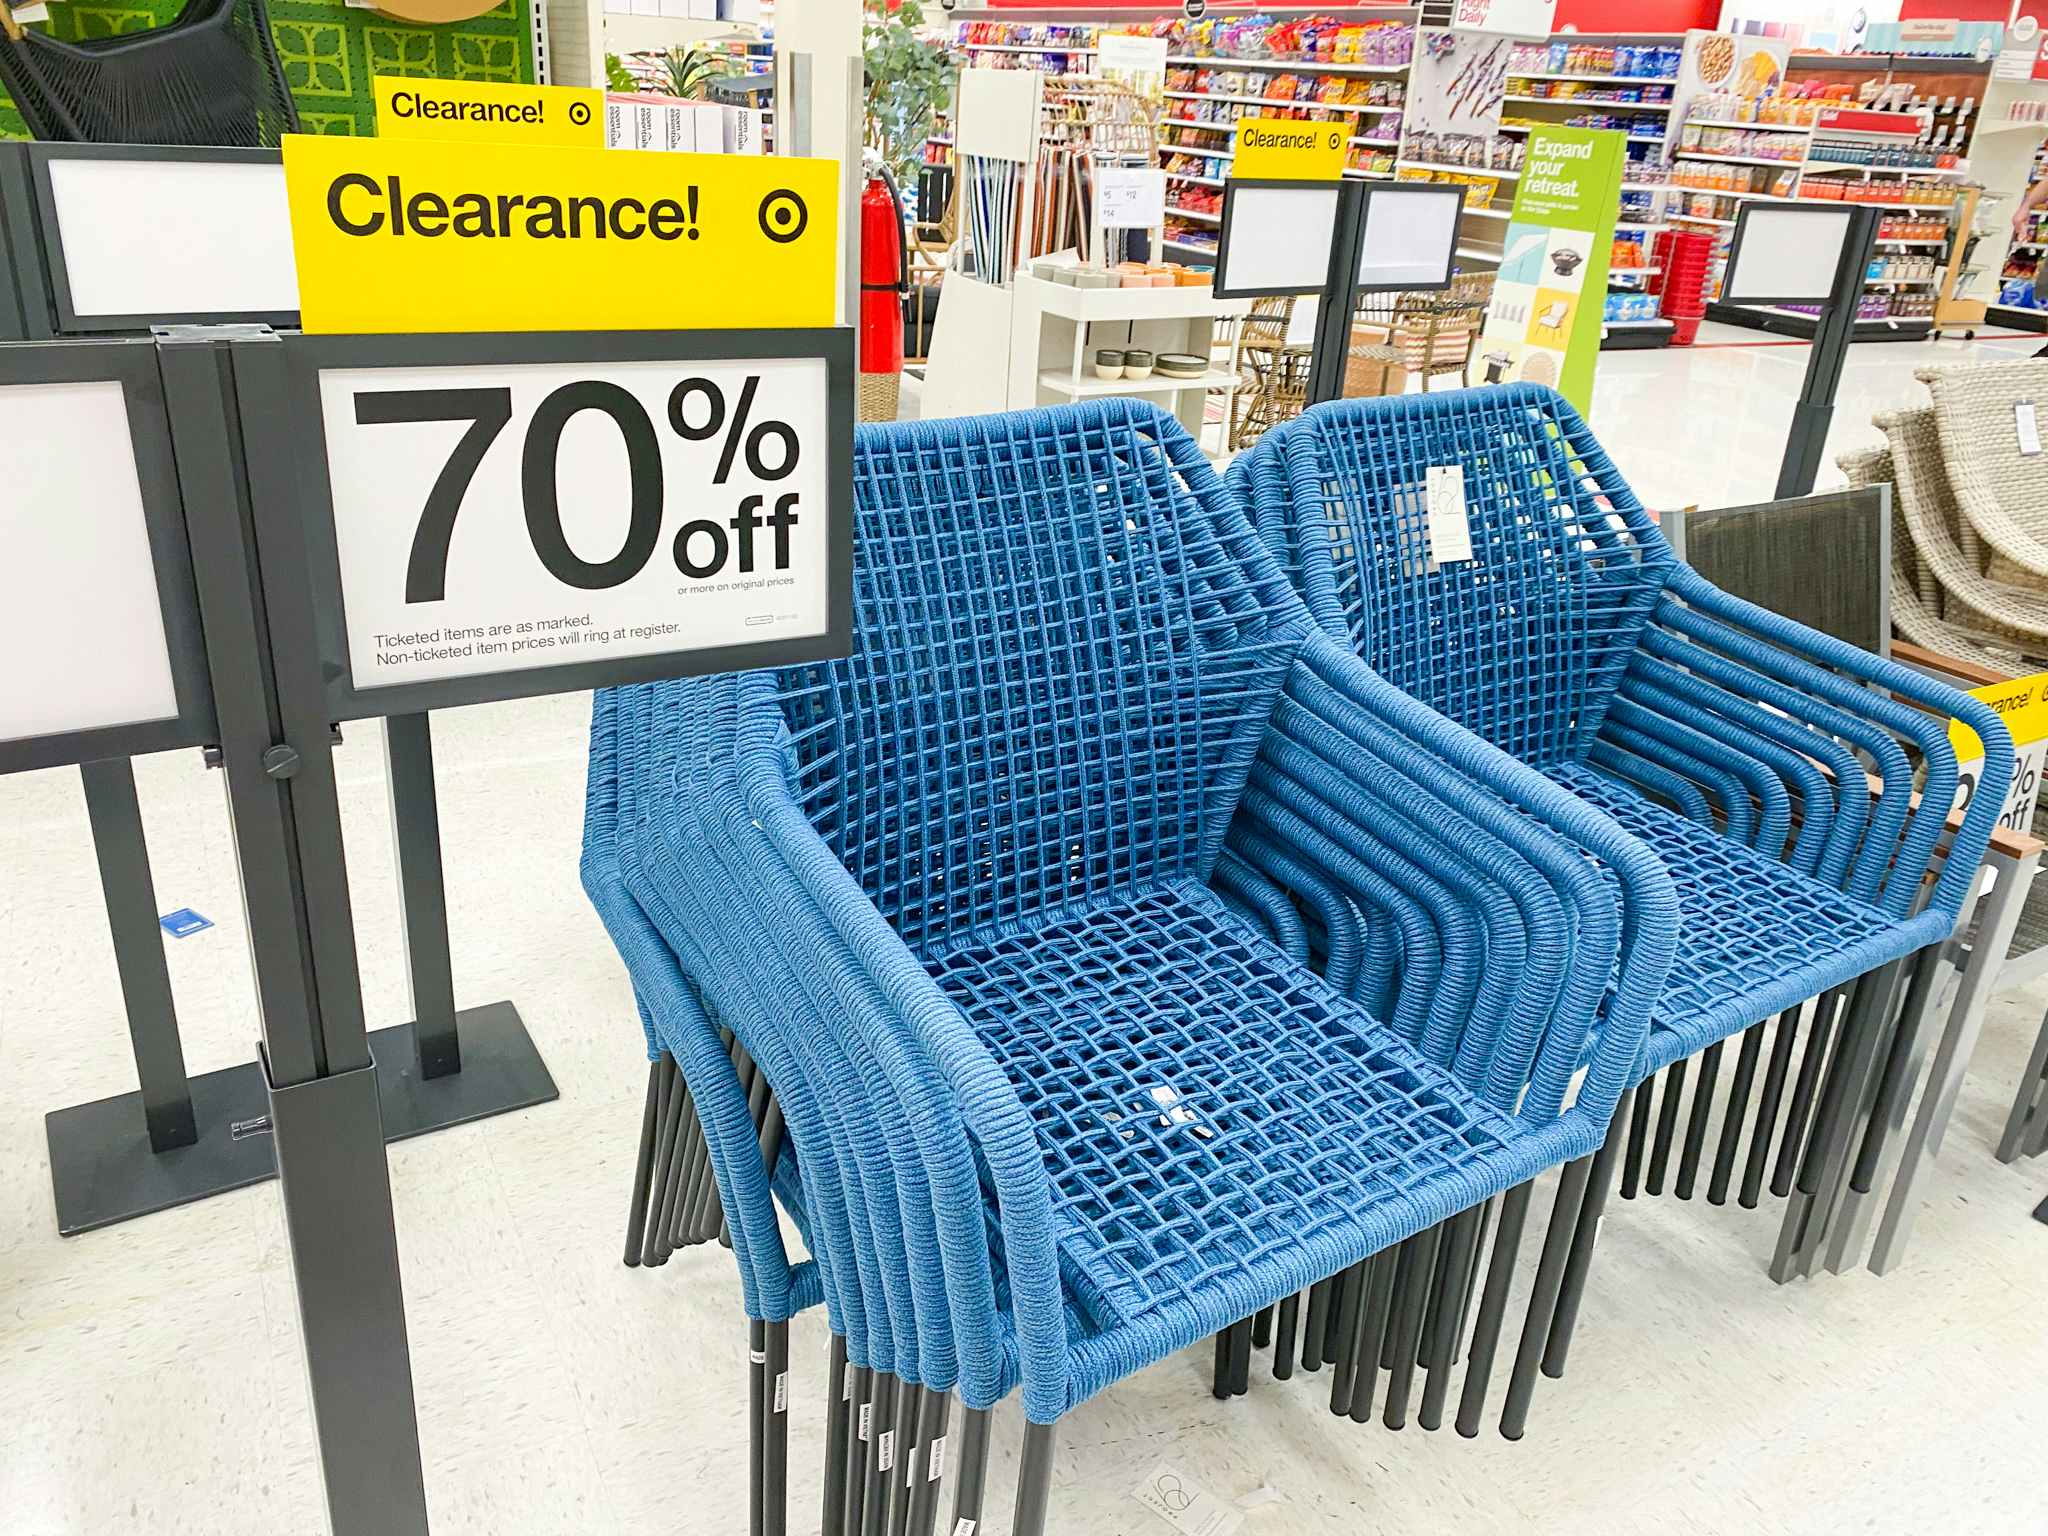 70% off clearance sale sign next to patio furniture at Target